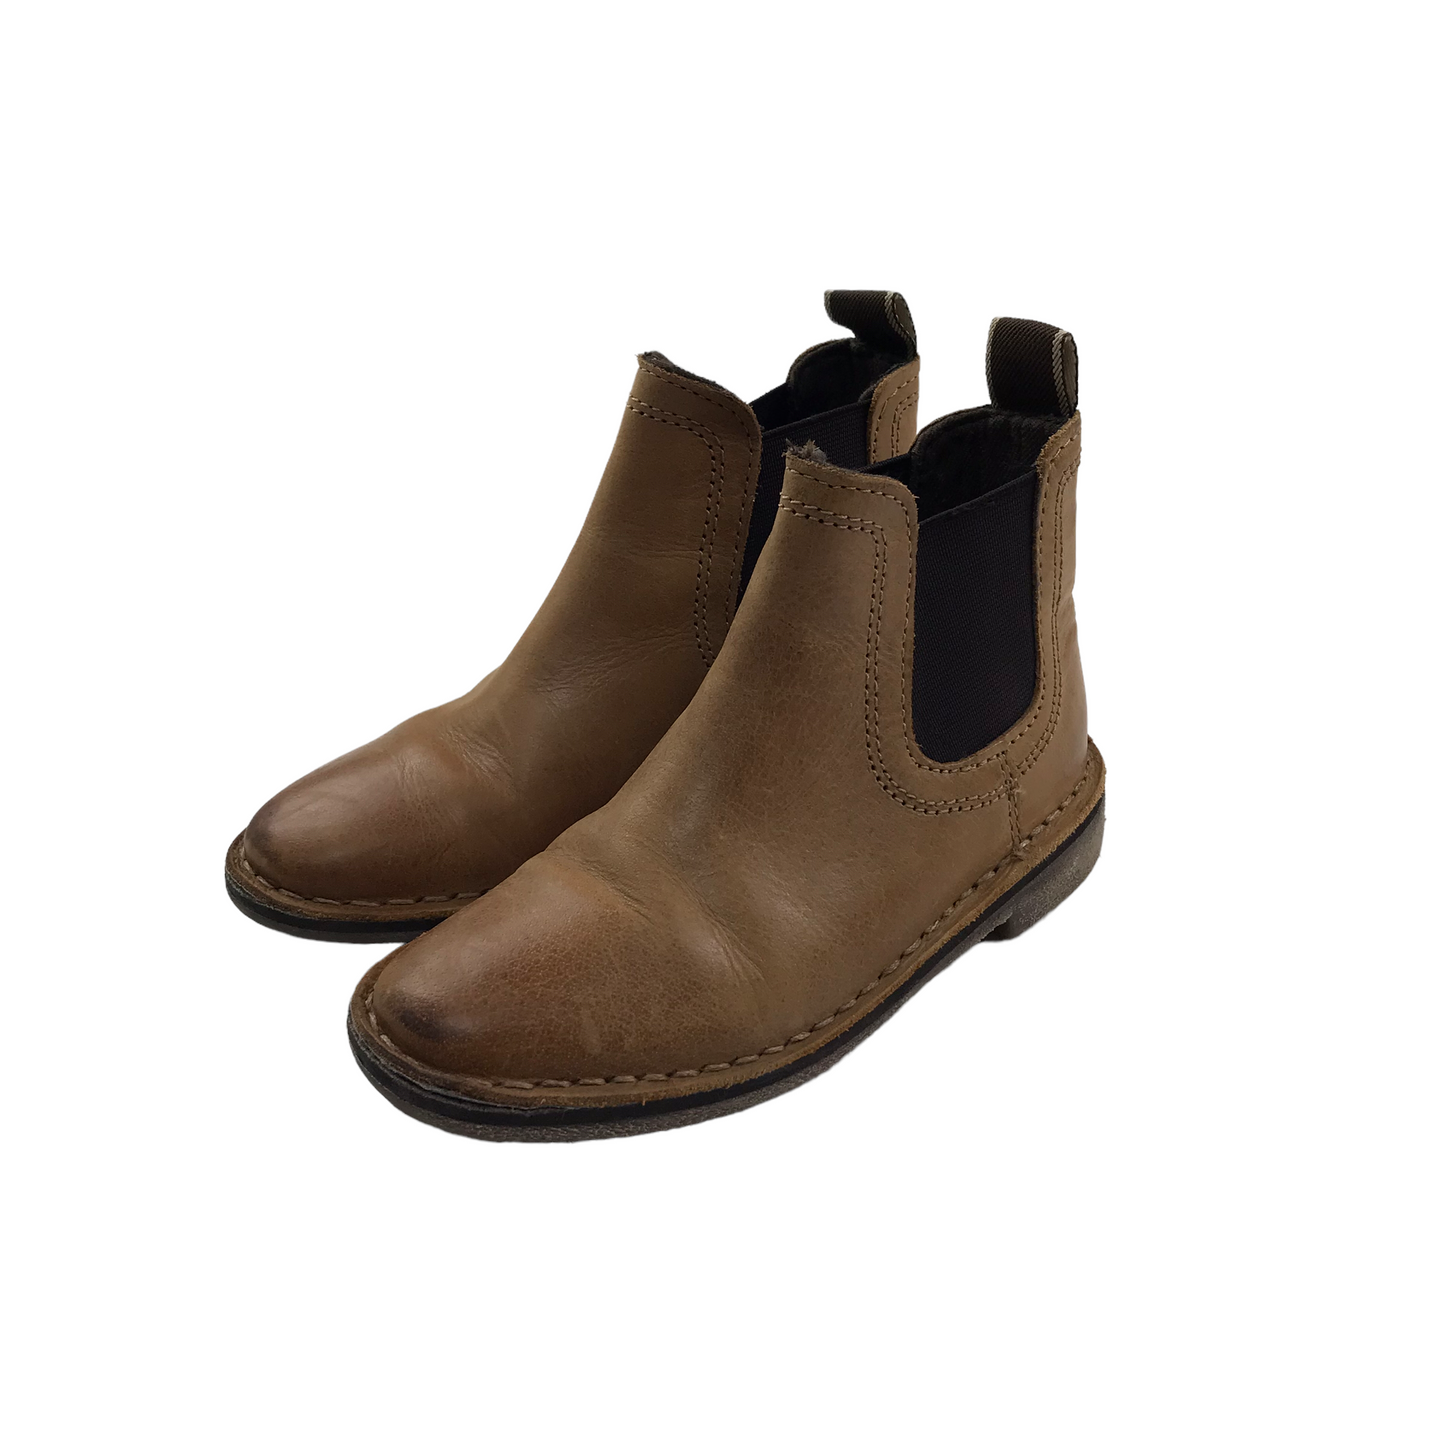 Next Tanned Brown Chelsea Boots Shoe Size 9 junior